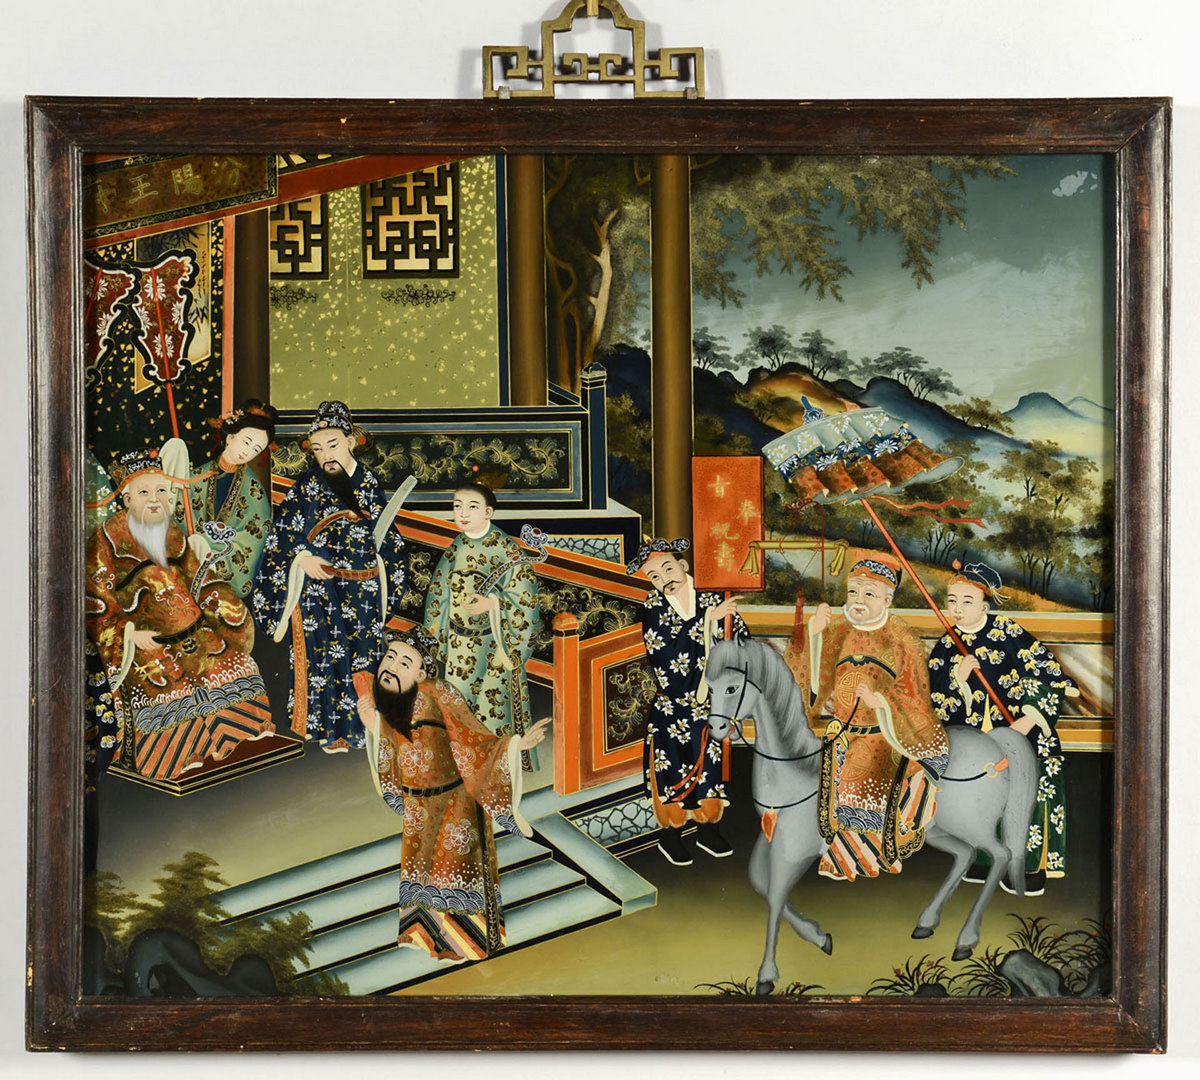 Lot 24: Chinese Palace Scene Reverse Painting on Glass